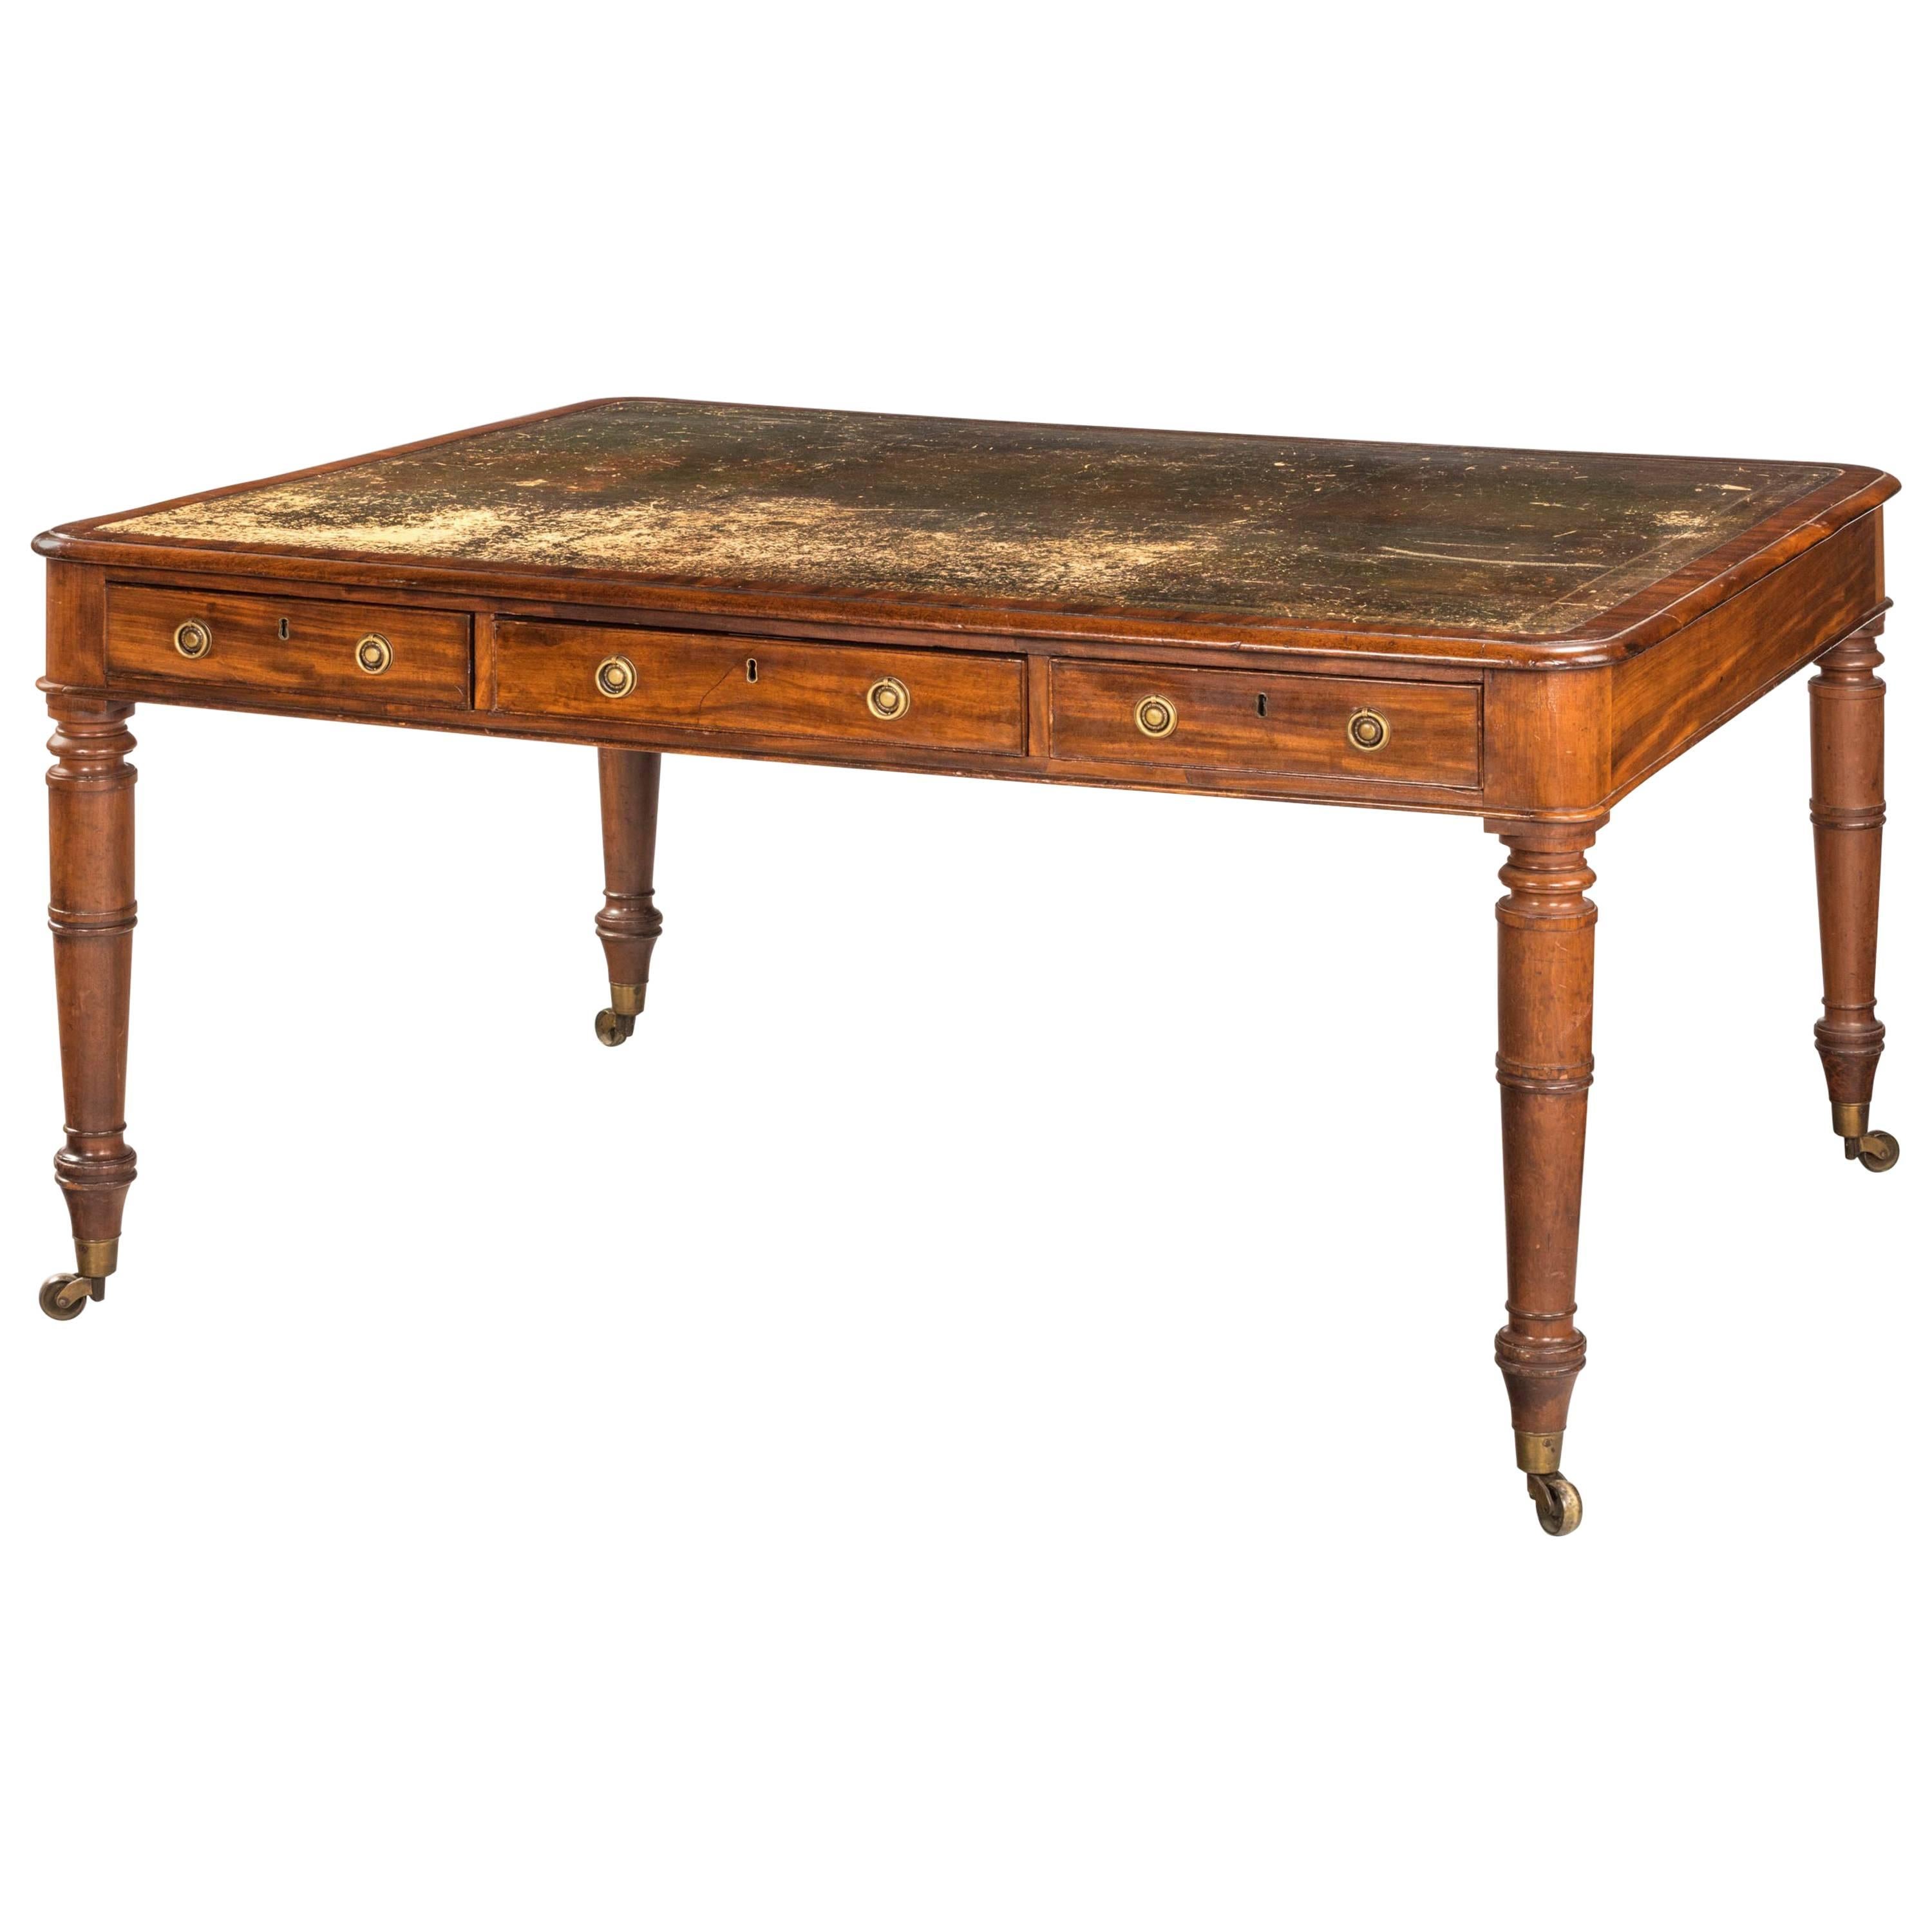 Late Regency Period Mahogany Six-Drawer Library Table